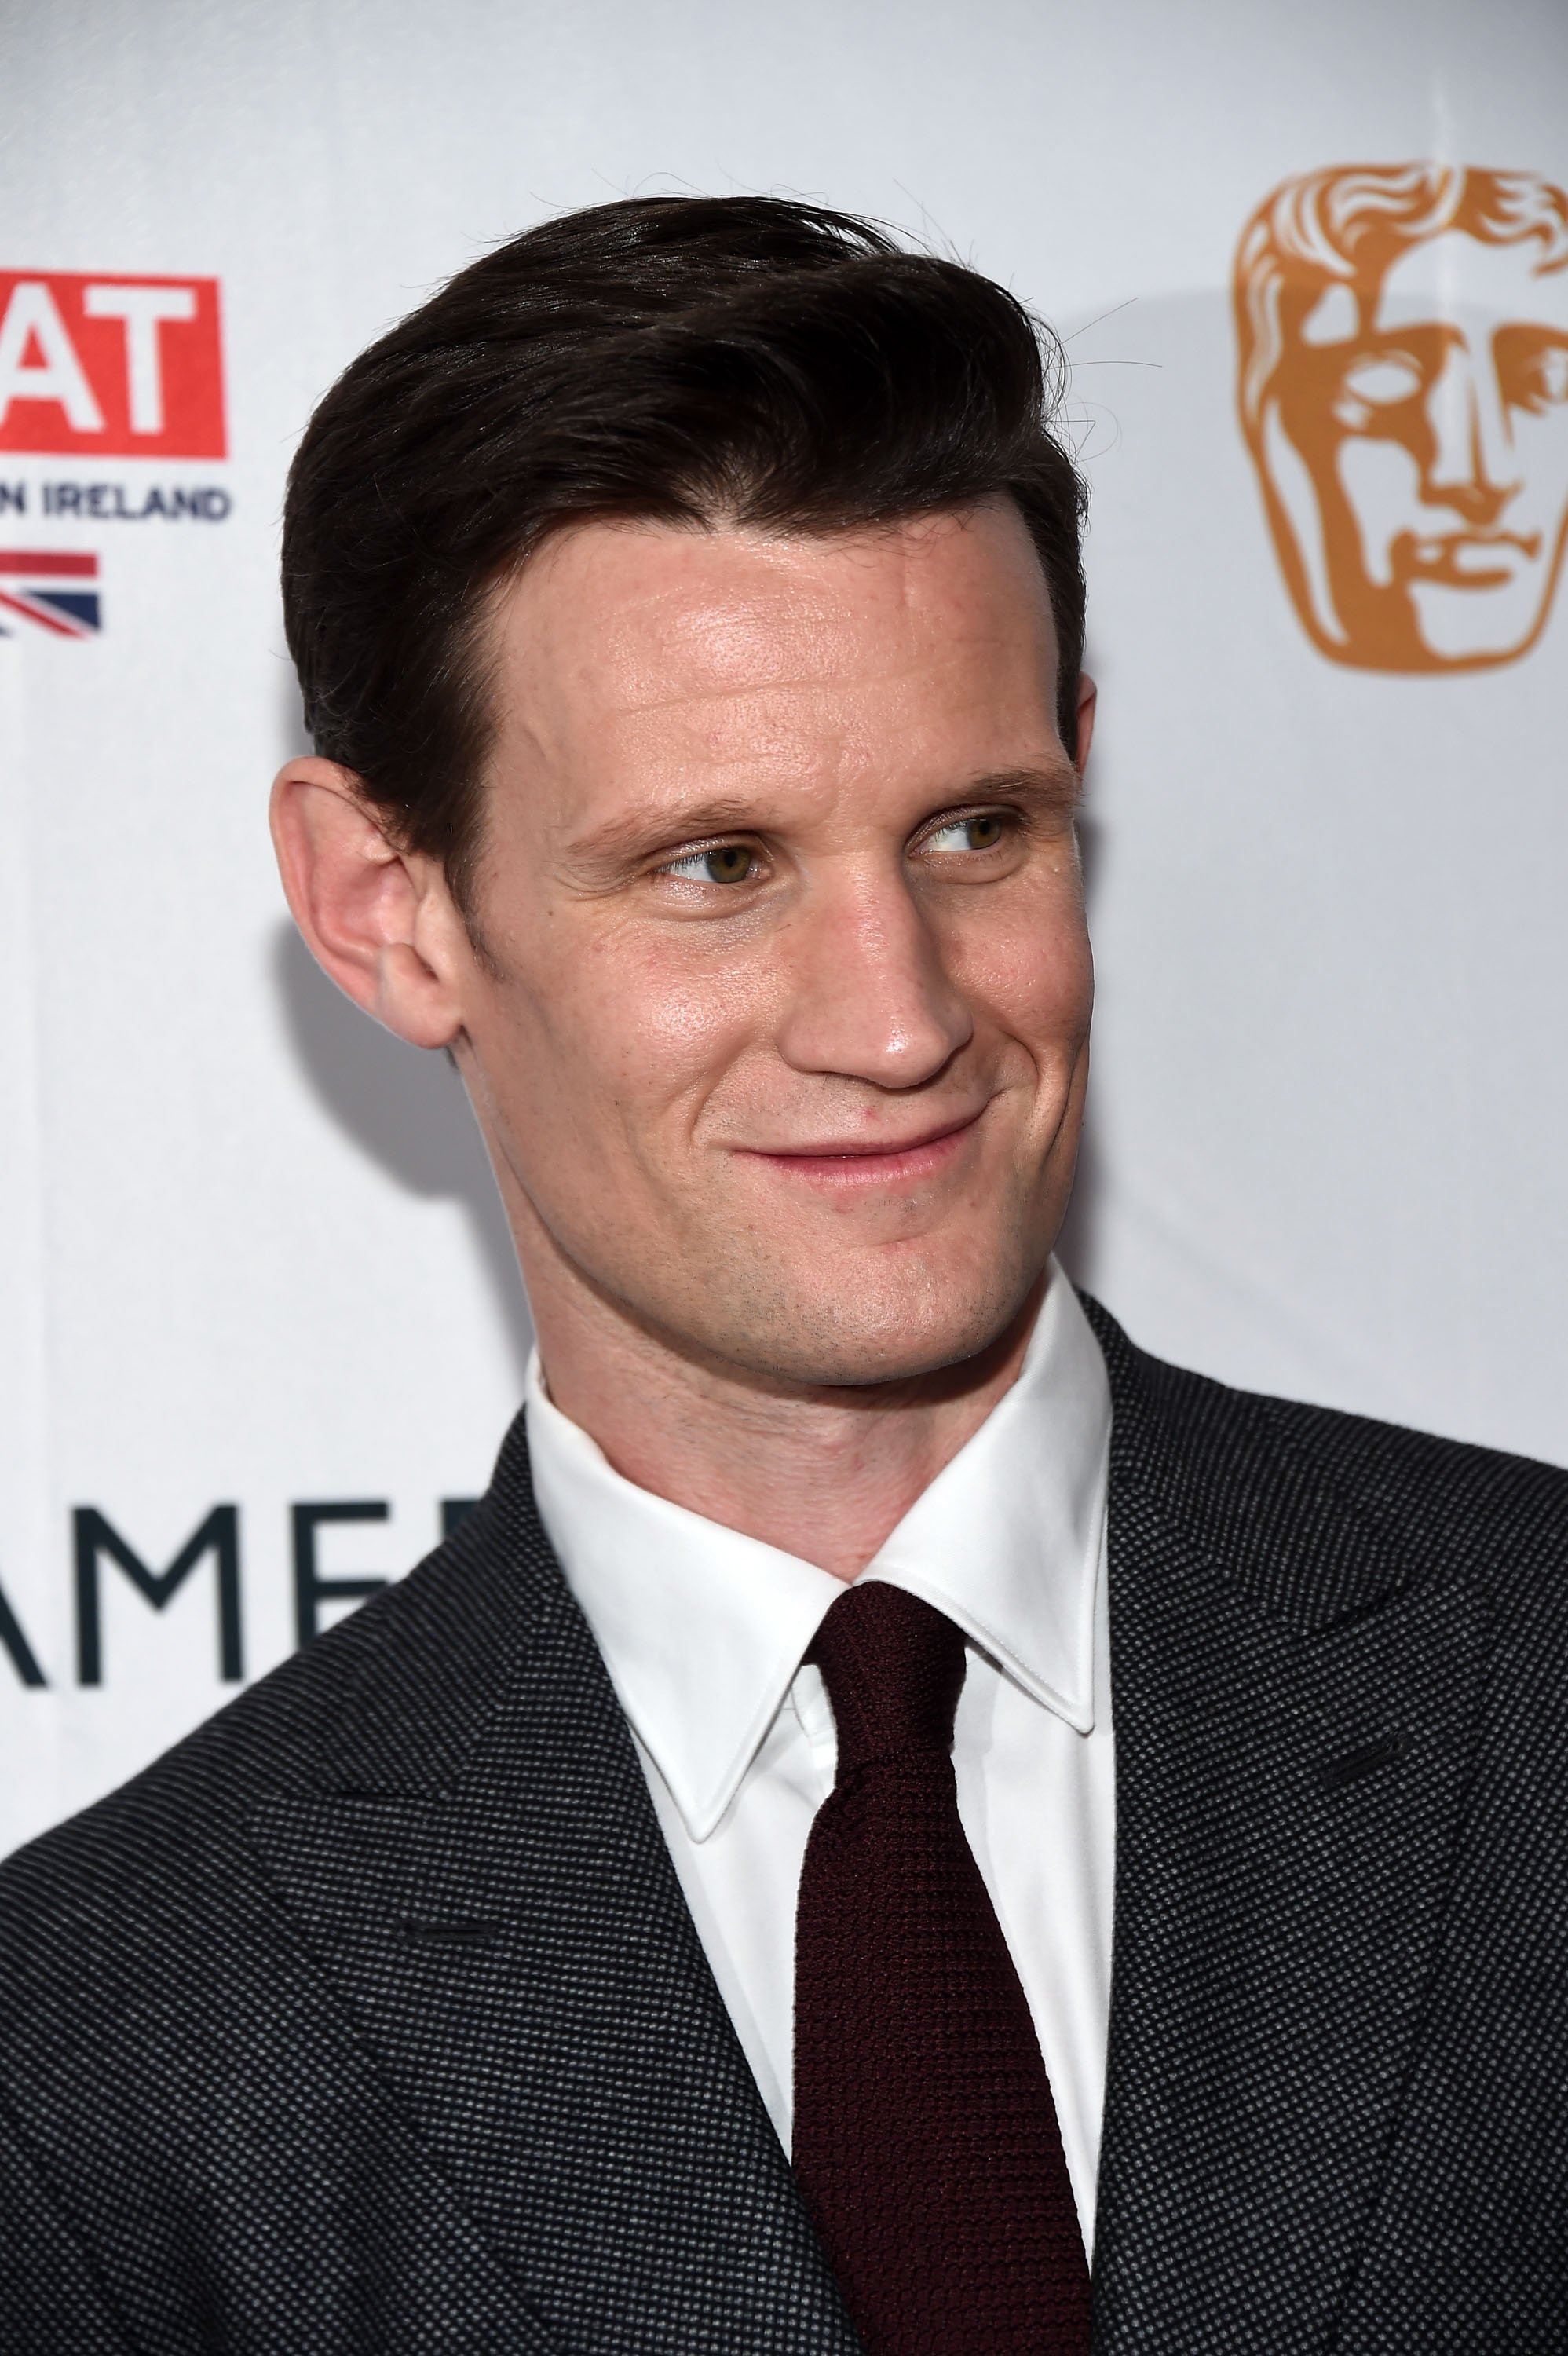 Actor Matt Smith arrives at the BBC America BAFTA Los Angeles TV Tea Party 2017 at The Beverly Hilton Hotel on September 16, 2017 in Beverly Hills, California. | Source: Getty Images